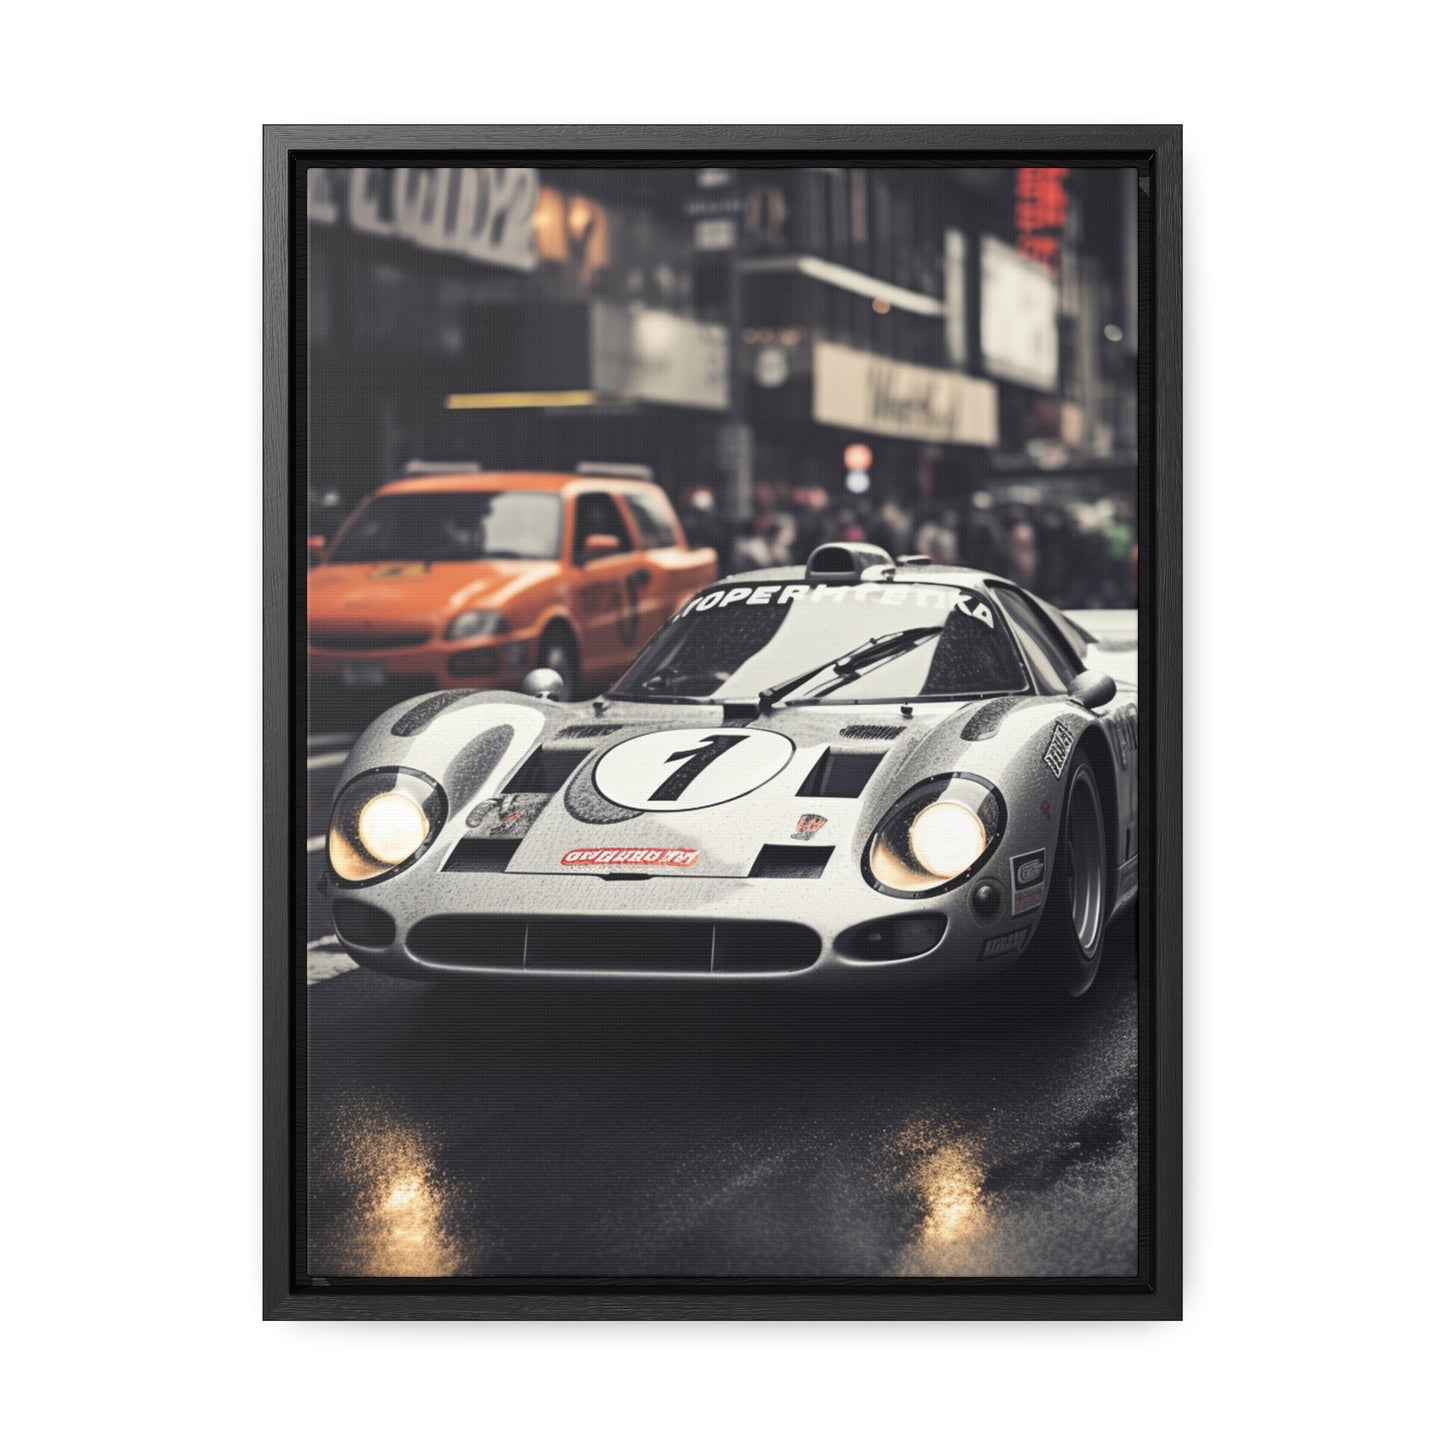 Porsche 917 in the streets of NY